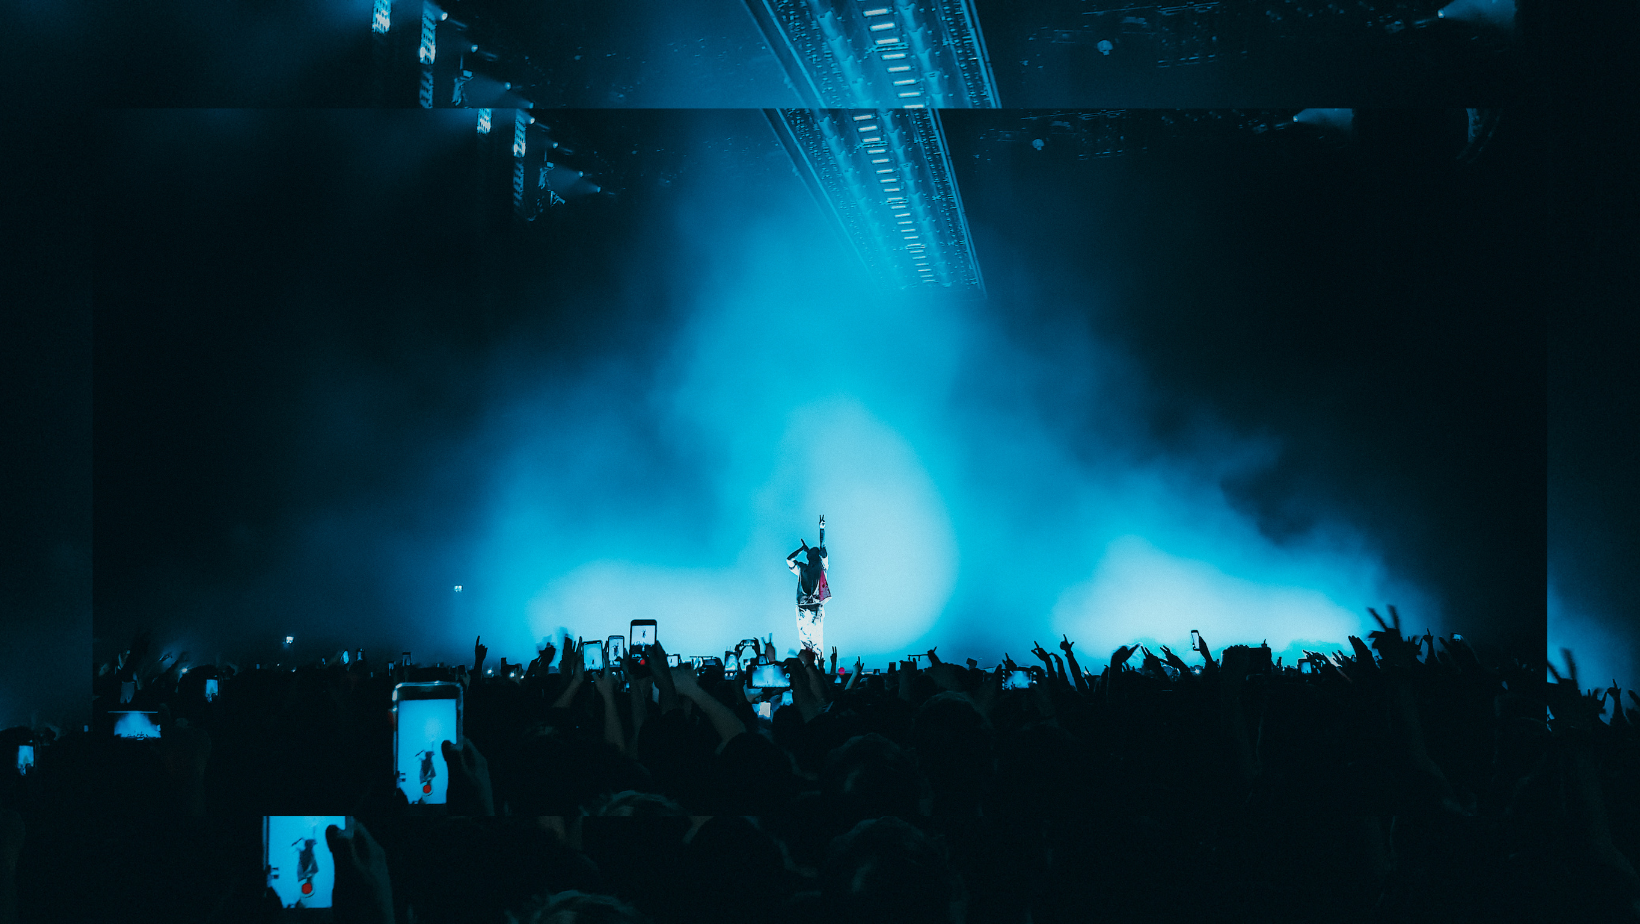 An electrifying concert atmosphere heightened by dense blue fog enveloping the stage, with a dynamic performer engaging the crowd, who are illuminated by stage lights and captured in silhouette. Scores of raised hands and mobile phones recording the moment create a landscape of excitement and shared experience, demonstrating the dramatic impact of specialty gases in entertainment.